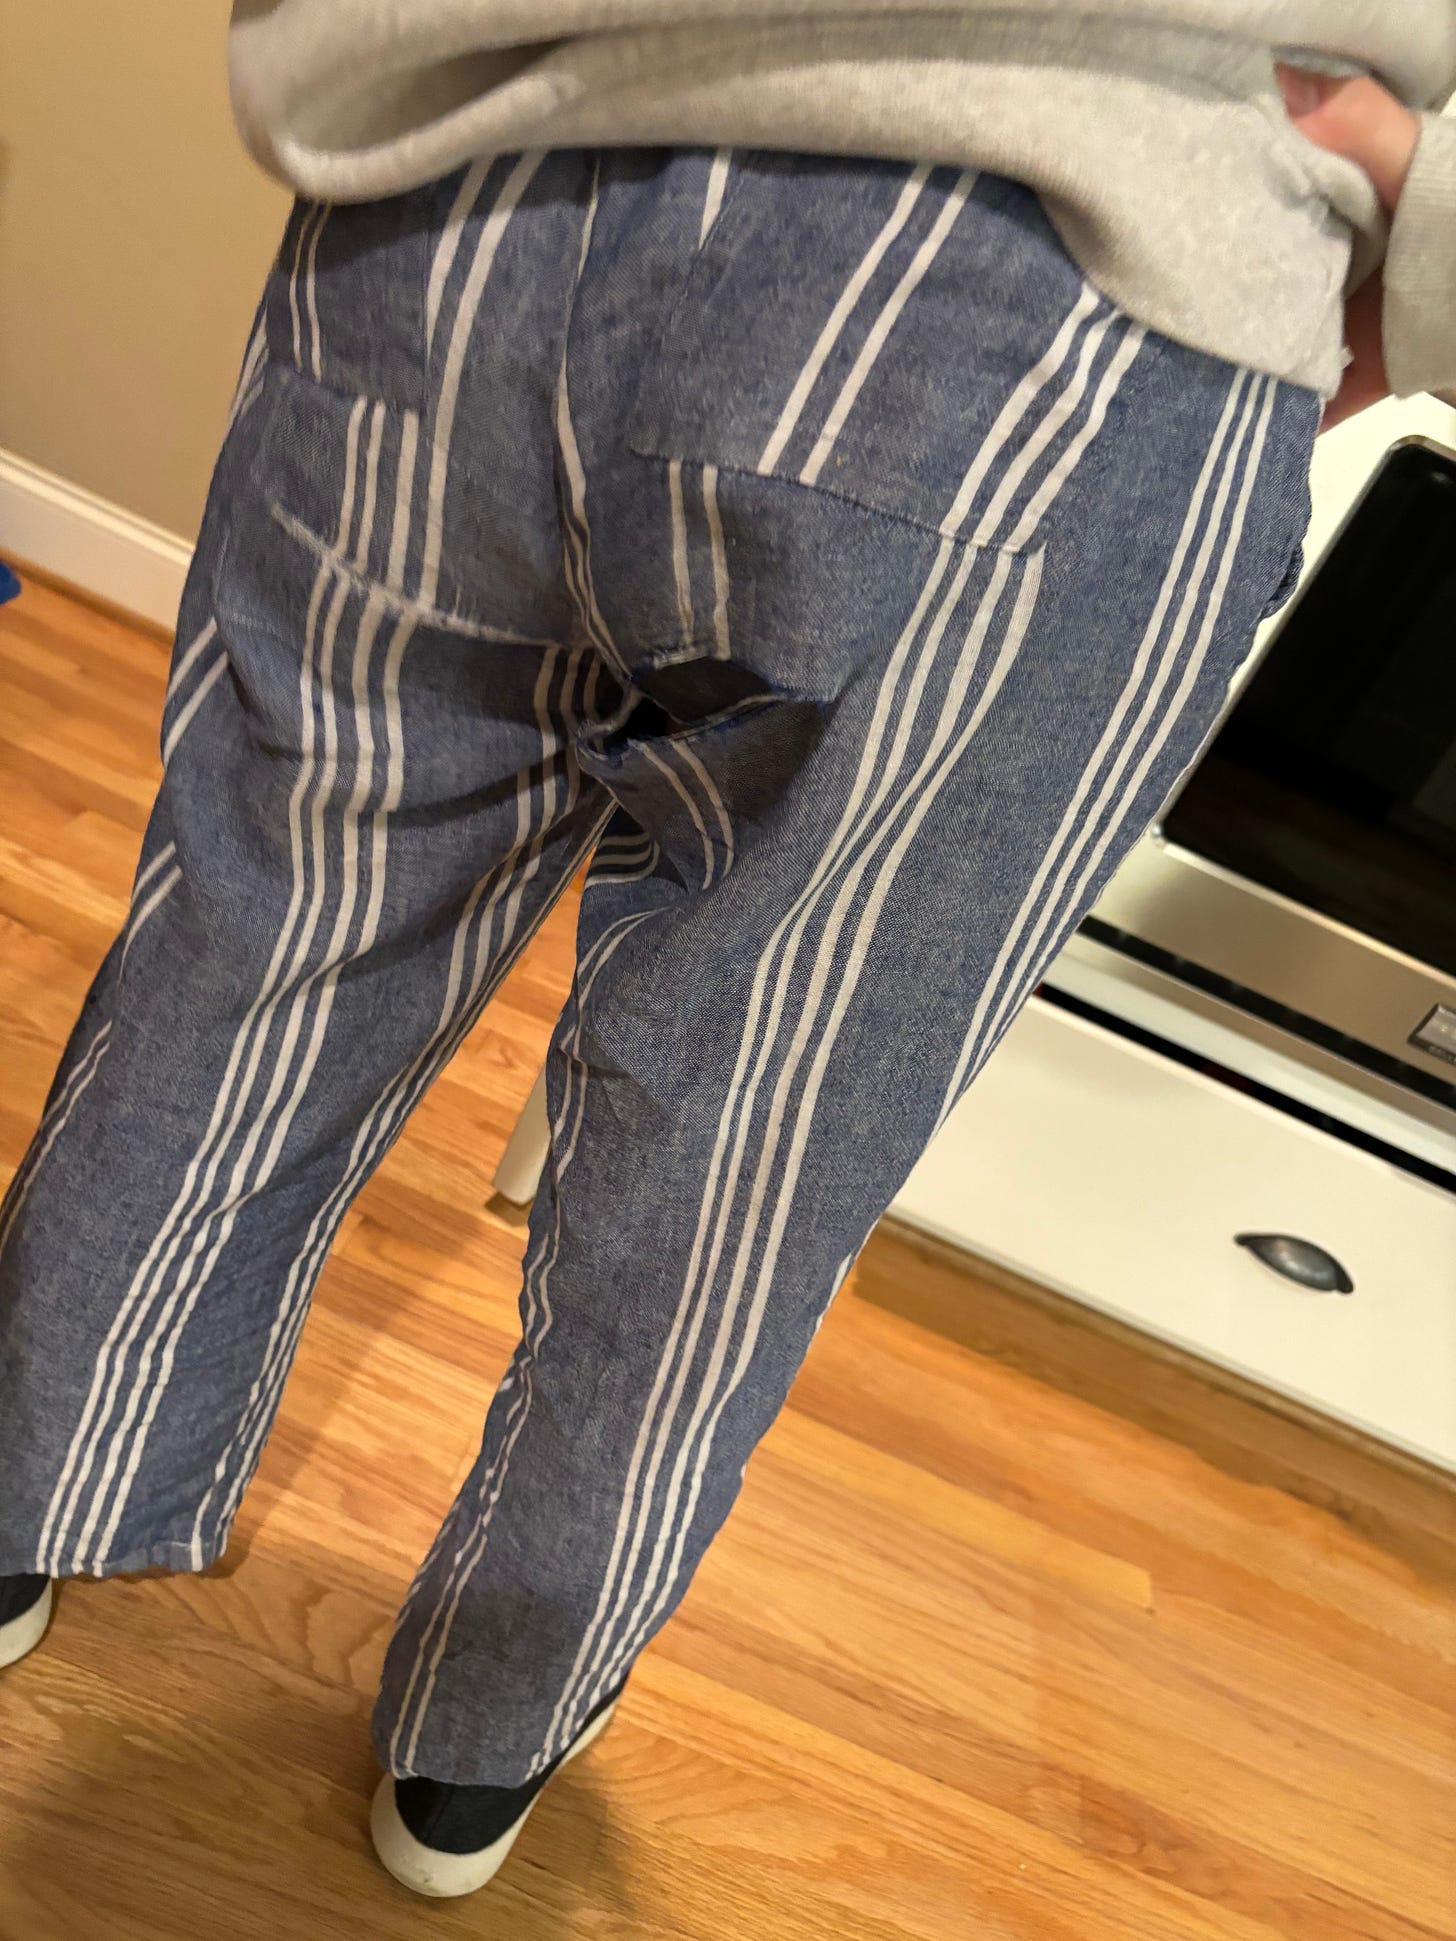 The author’s blue stiped linen pants, photo taken from behind, with a rip in the butt